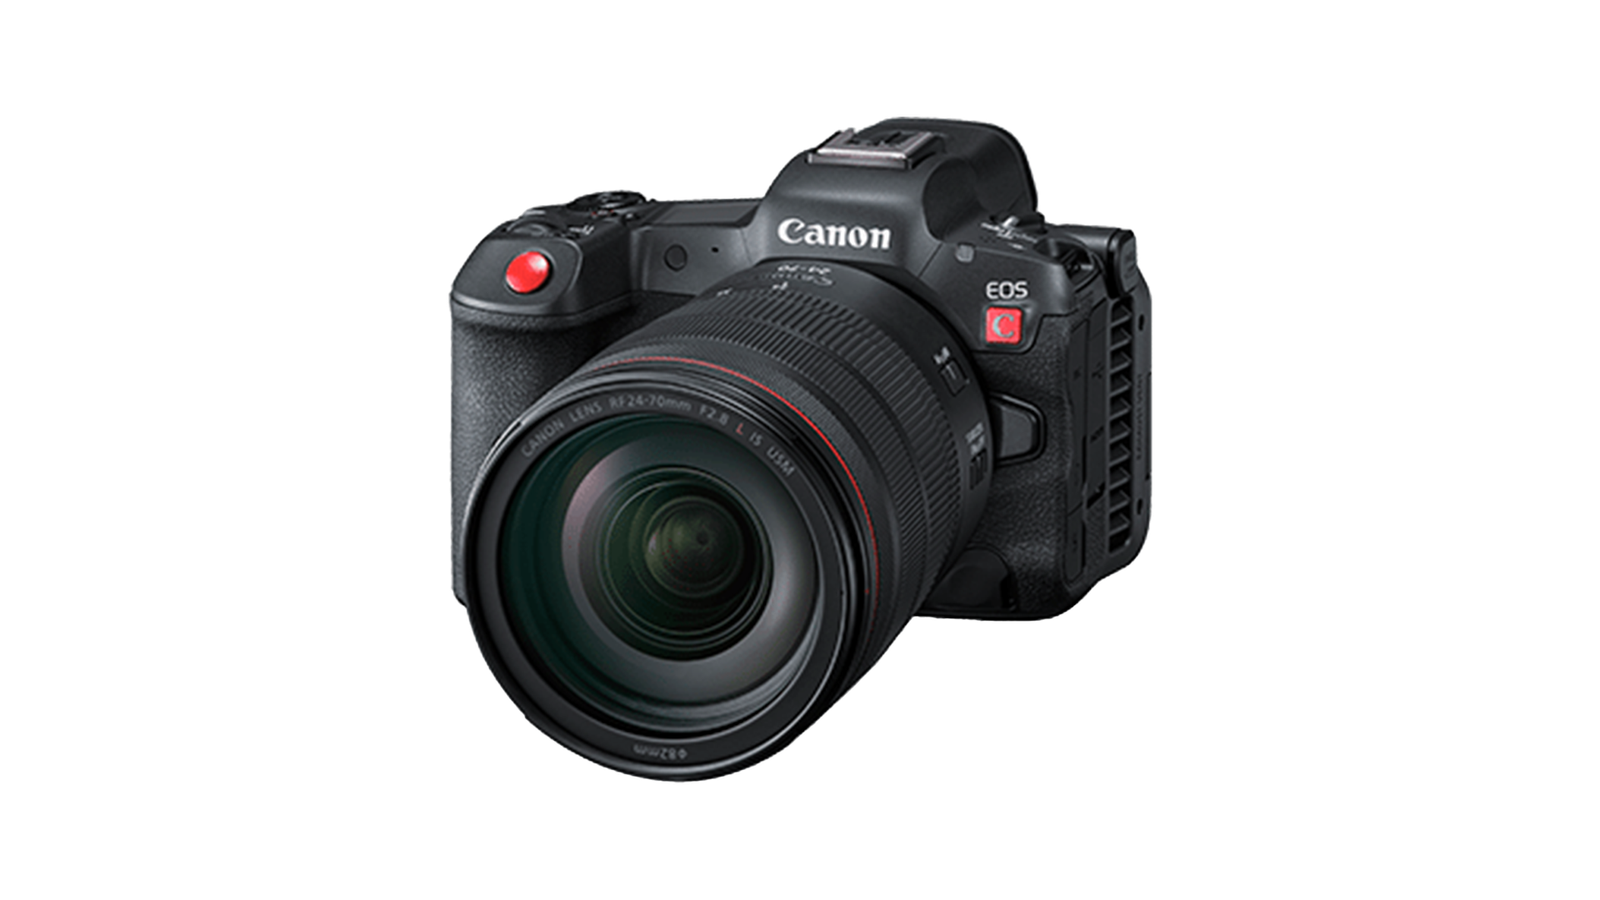 Canon EOS R5 - The best video camera for shooting stills as well